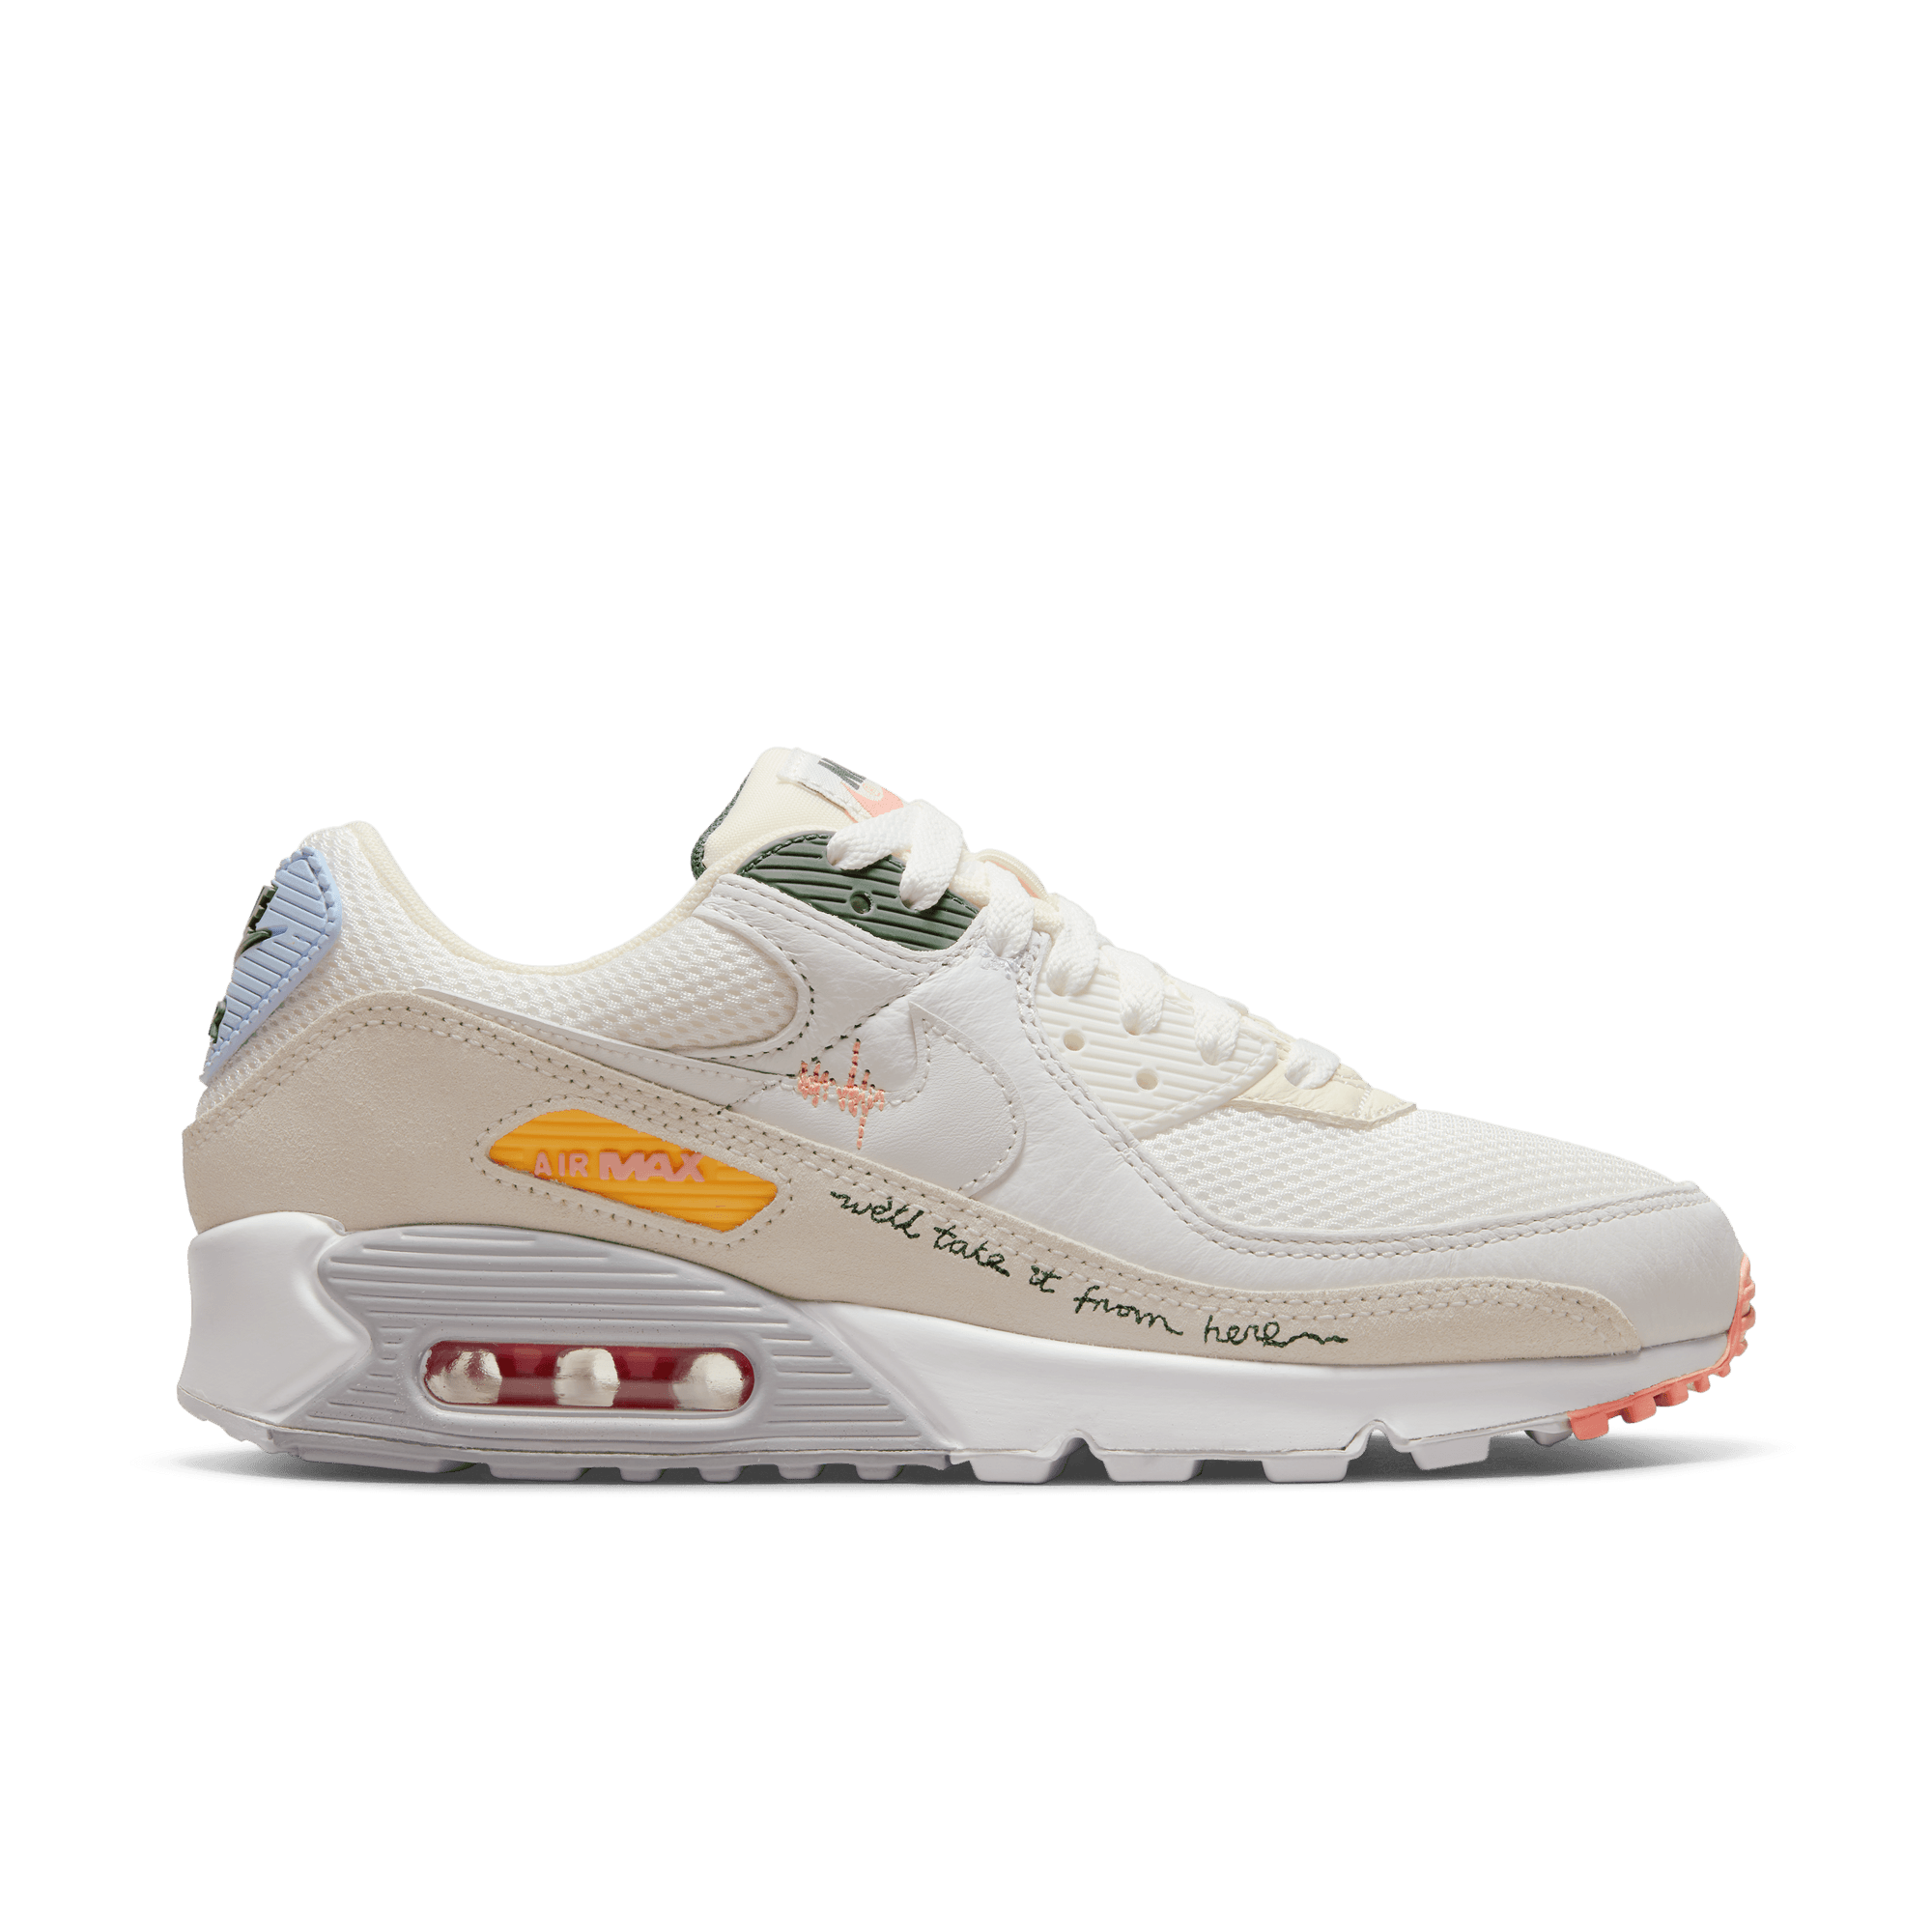 Womens Nike Air Max 90 'We'll Take it from Here'